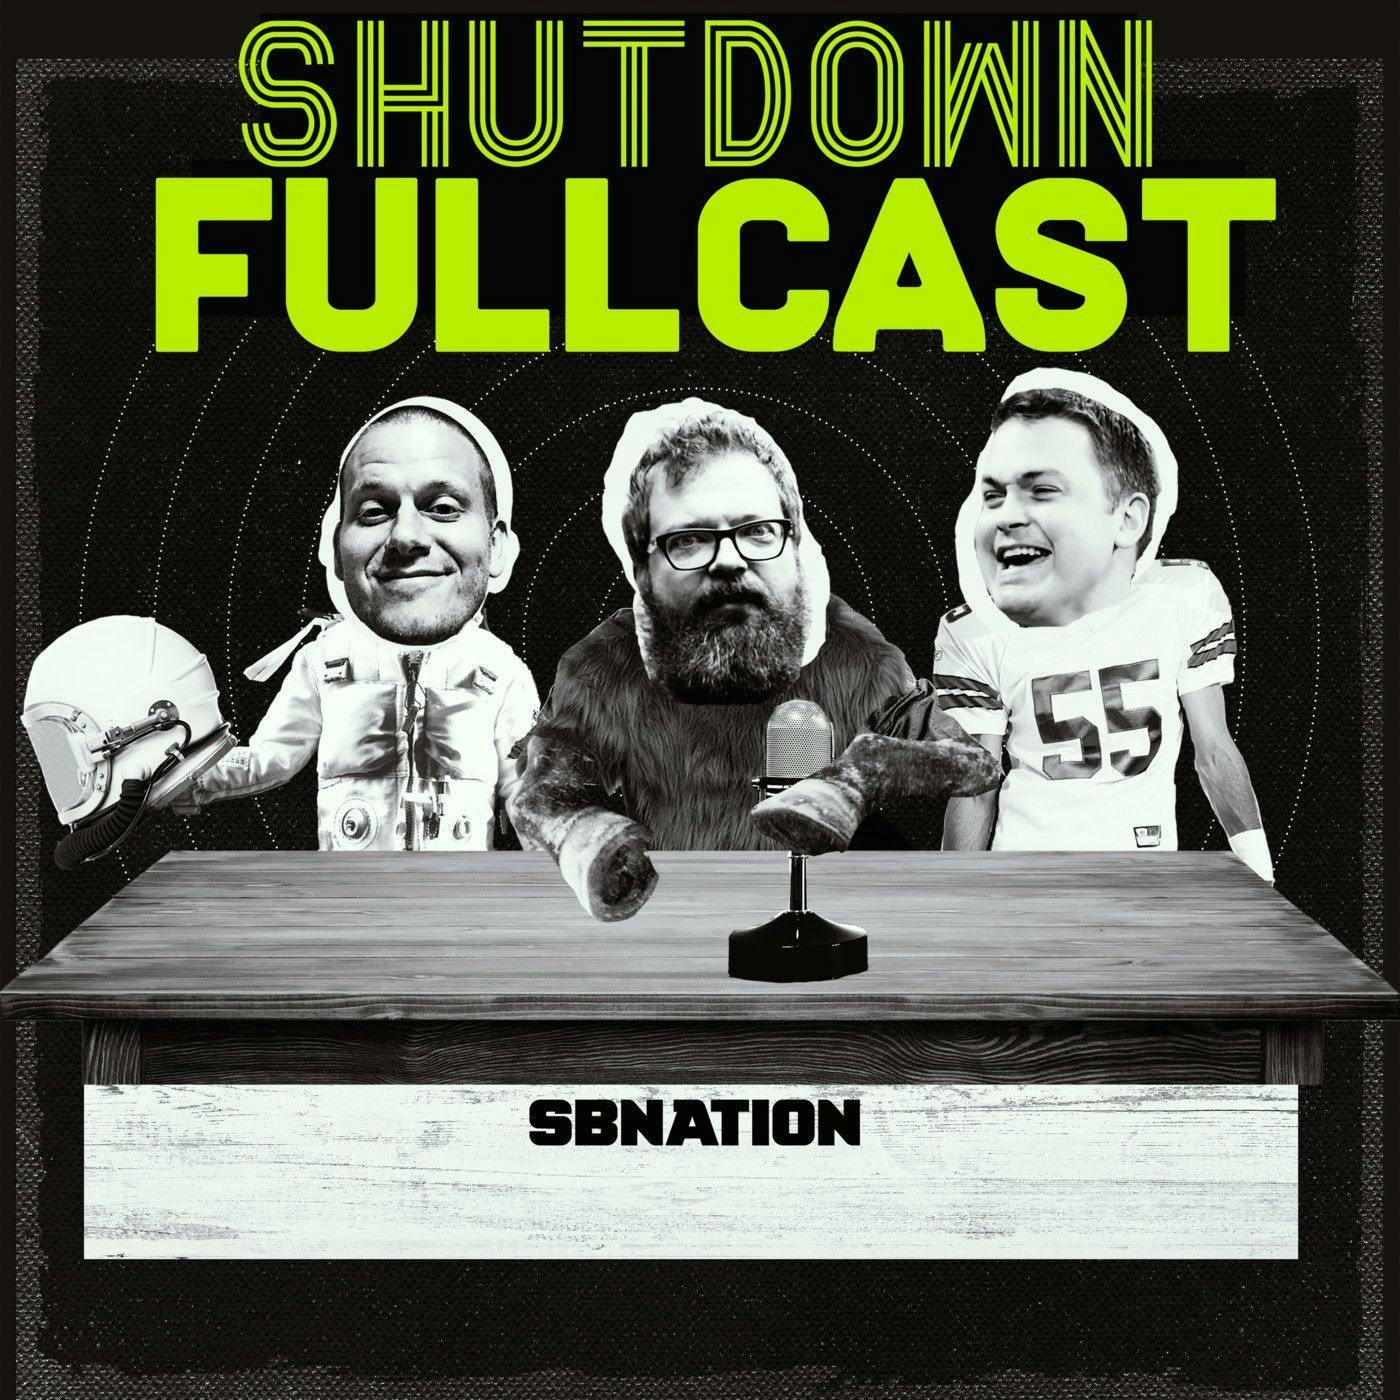 Shutdown Fullcast 40 for 40: The 2017 Independence Bowl